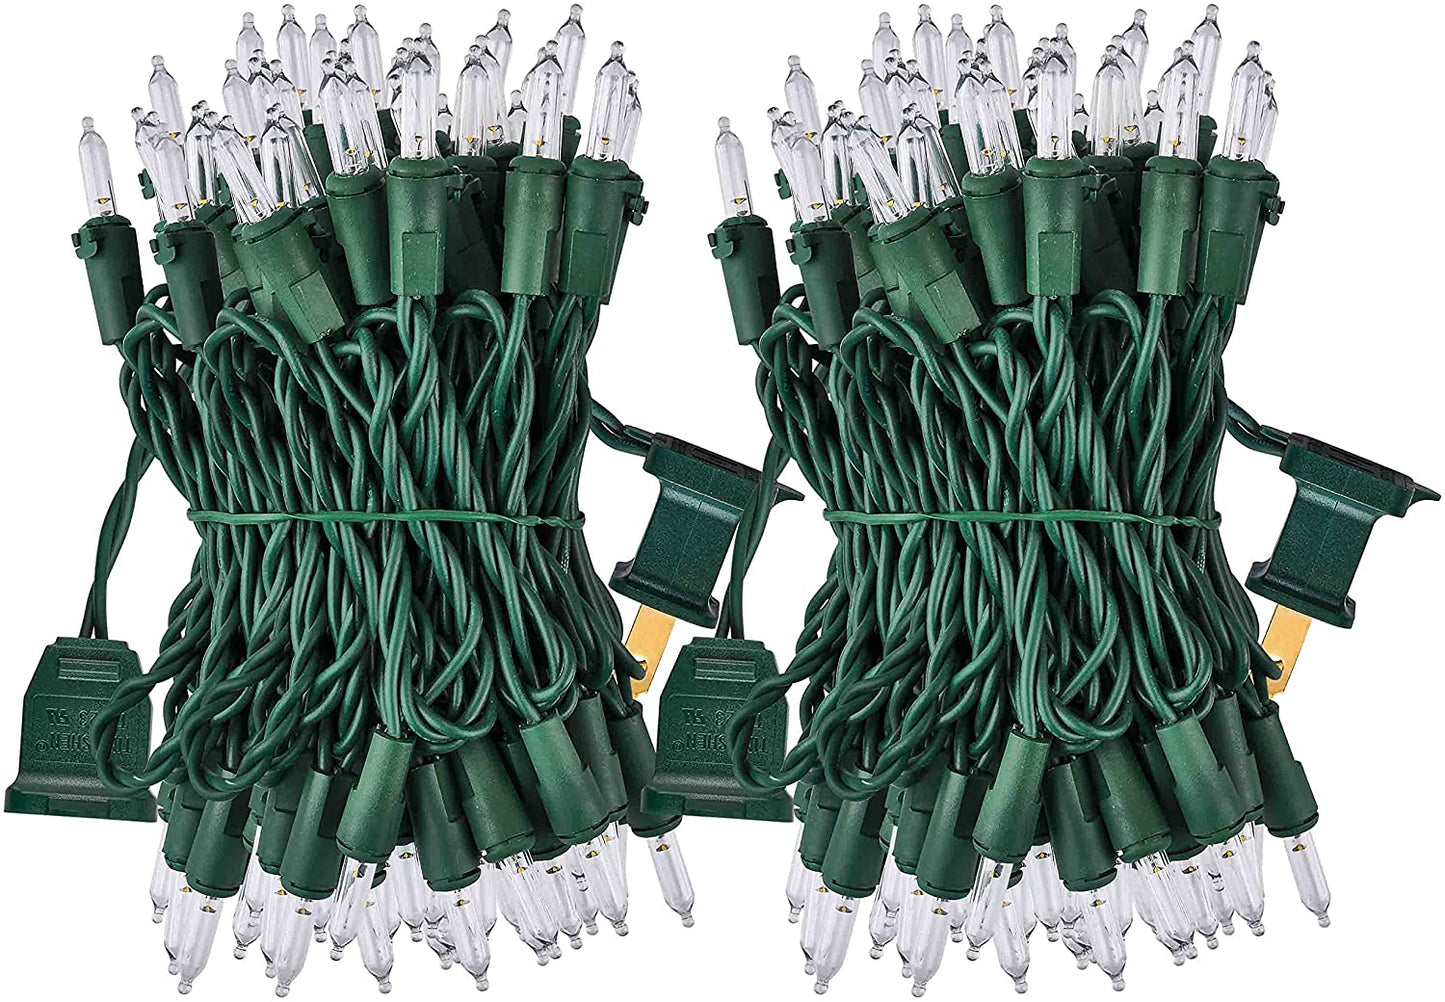 52.5 FT 200 Count Christmas Clear Green Wire